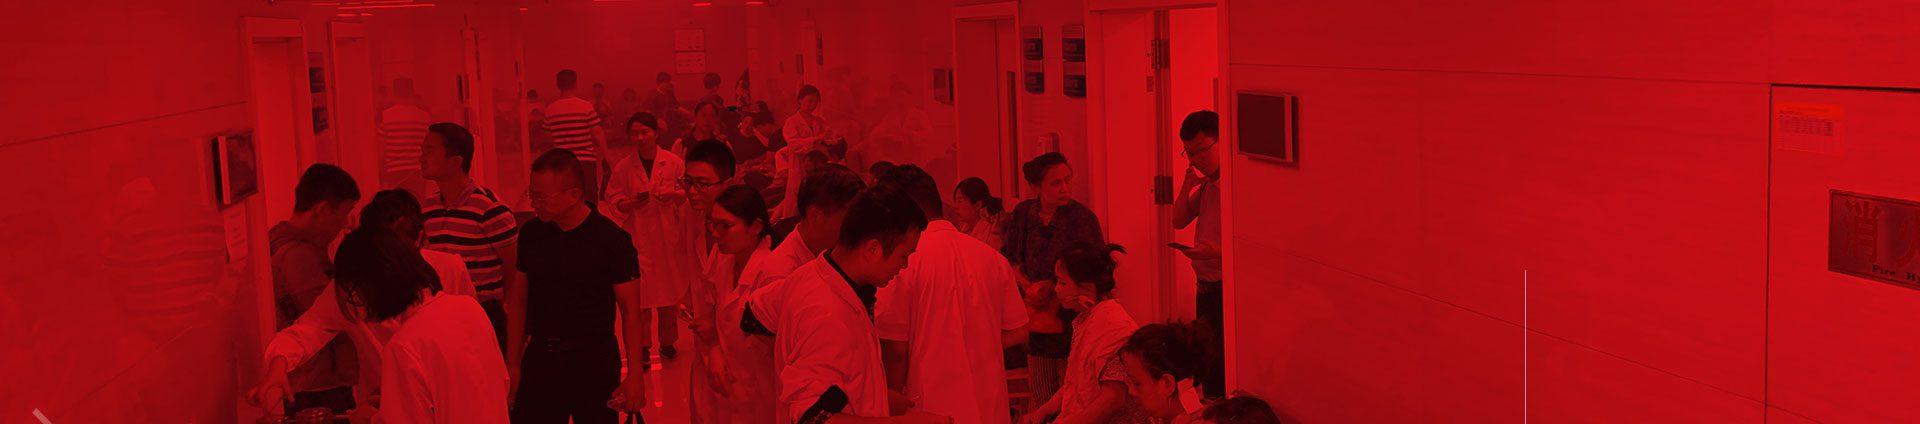 The typical busy waiting and treatment areas in the hallway of the Acupuncture Department at Anhui University of Chinese Medicine Hospital